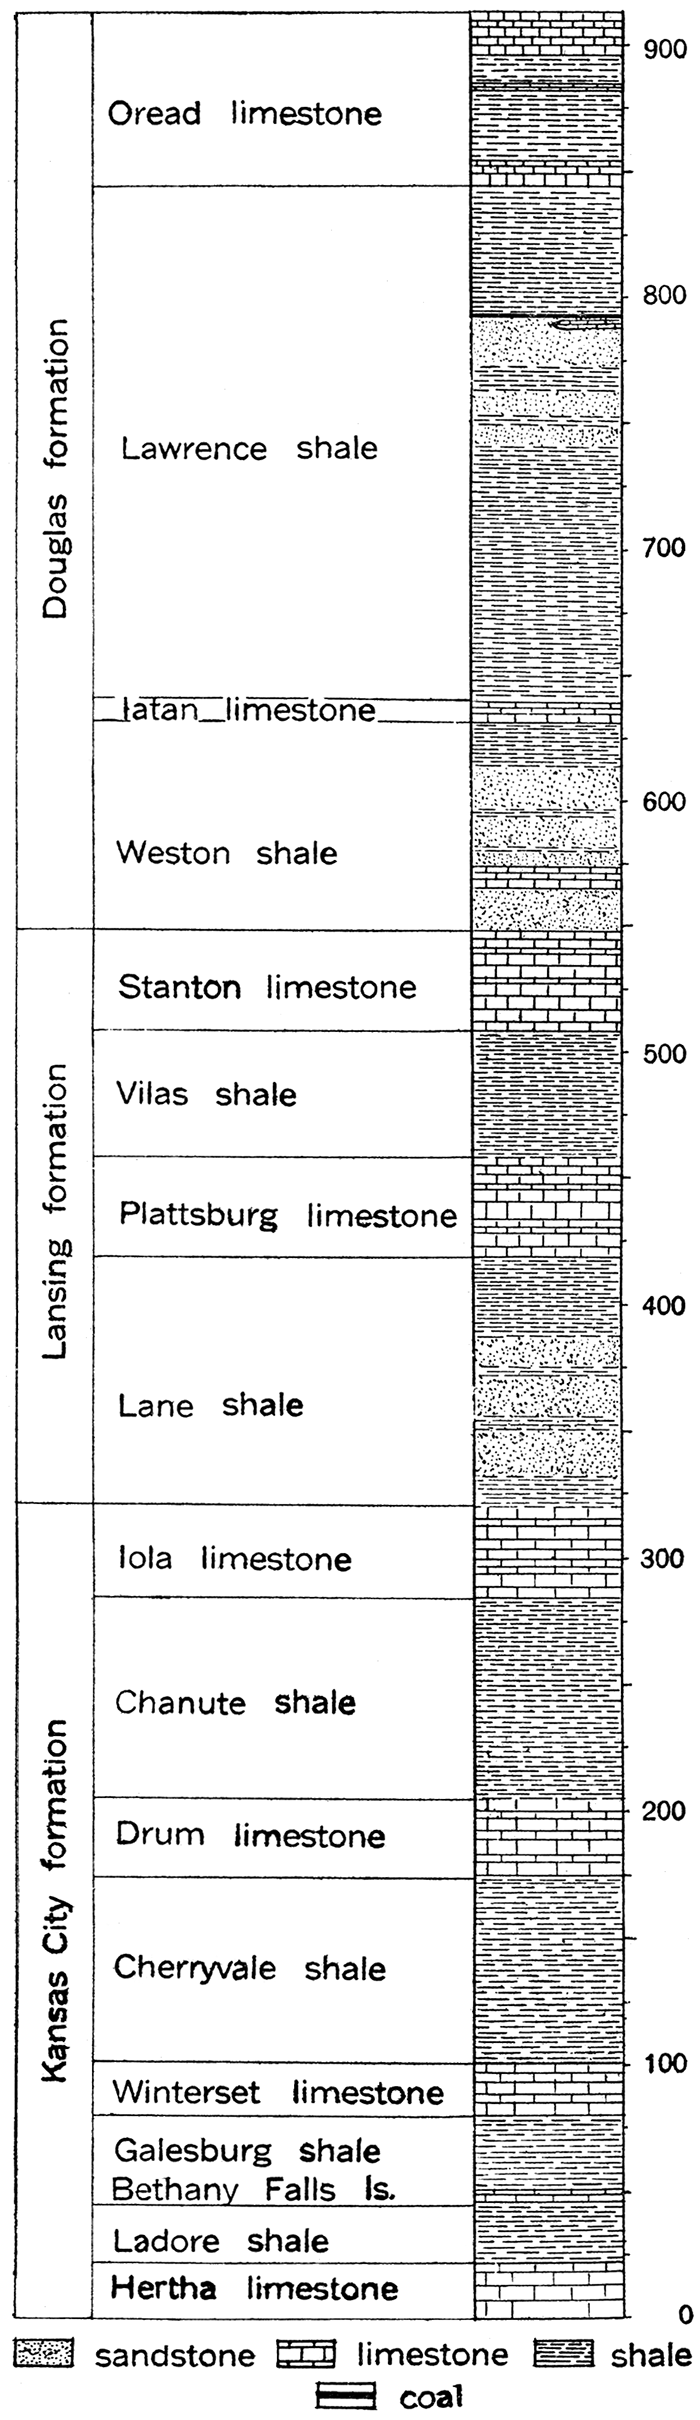 Generalized section of the Kansas City, Lansing and Douglas formations of the Missouri group of the Pennsylvanian in Kansas.